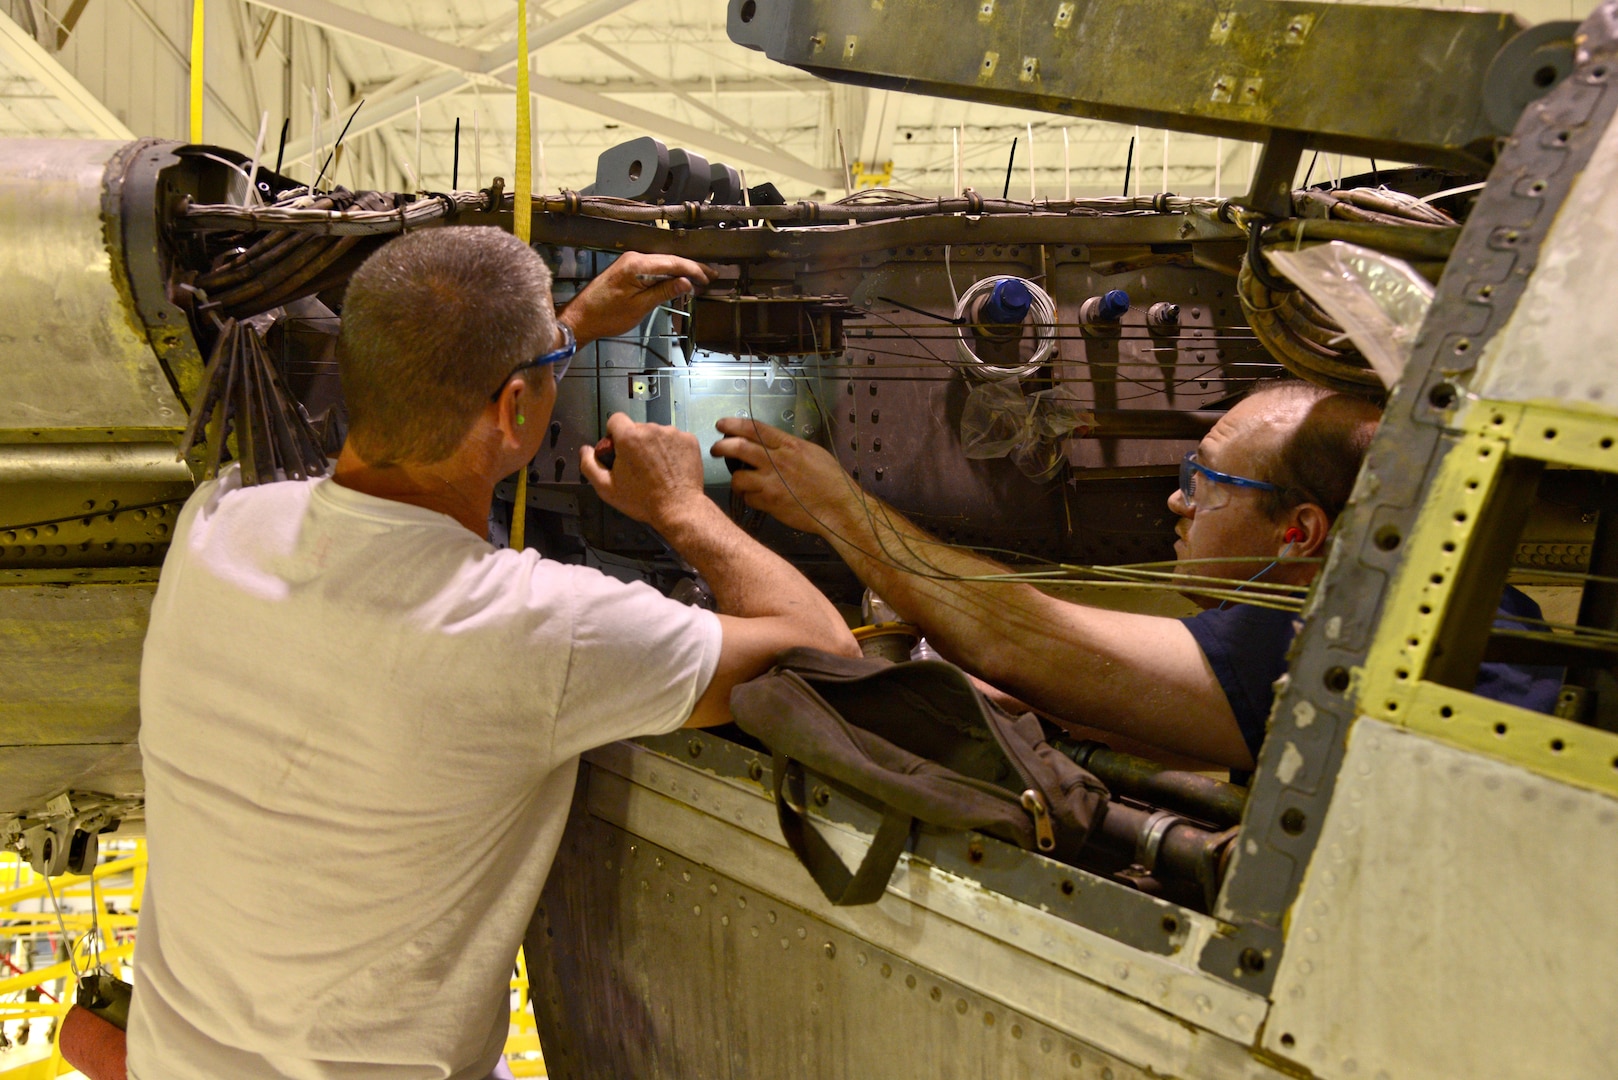 Chris Carson and Martin Harpster, both aircraft mechanics with the 565th Aircraft Maintenance Squadron, work on throttle cable pullies on the right wing of “Ghost Rider.” (Air Force photo by Kelly White/Released)